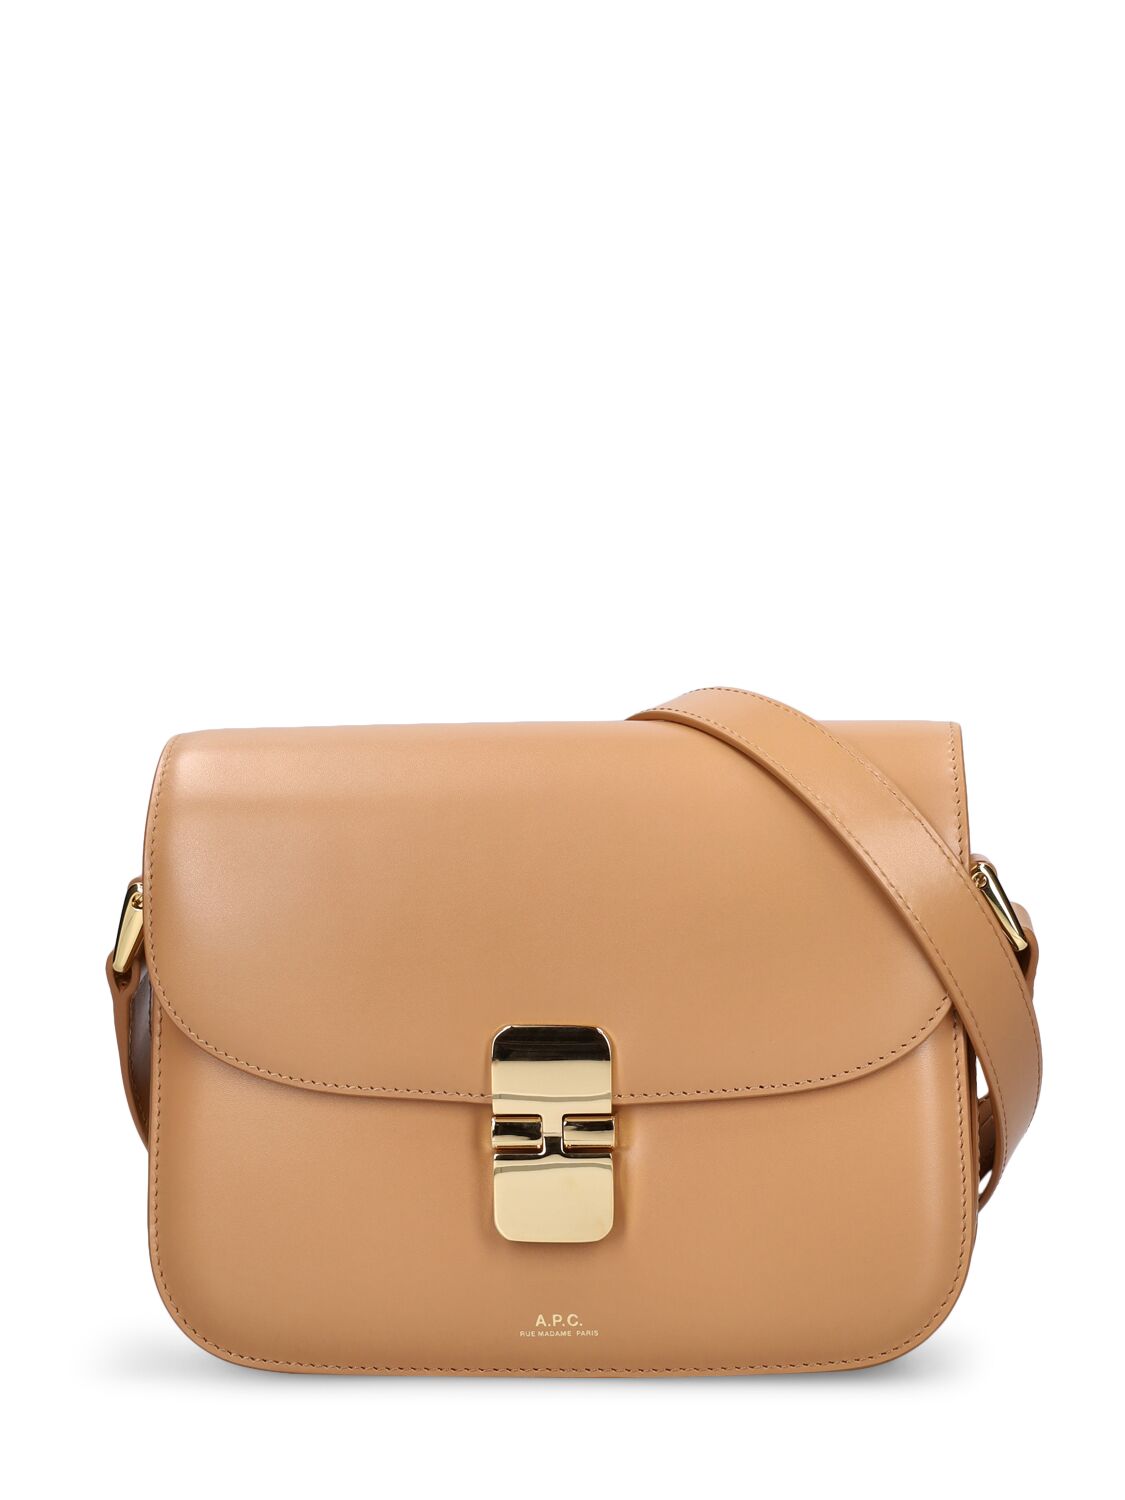 Apc Small Grace Leather Shoulder Bag In Dulce